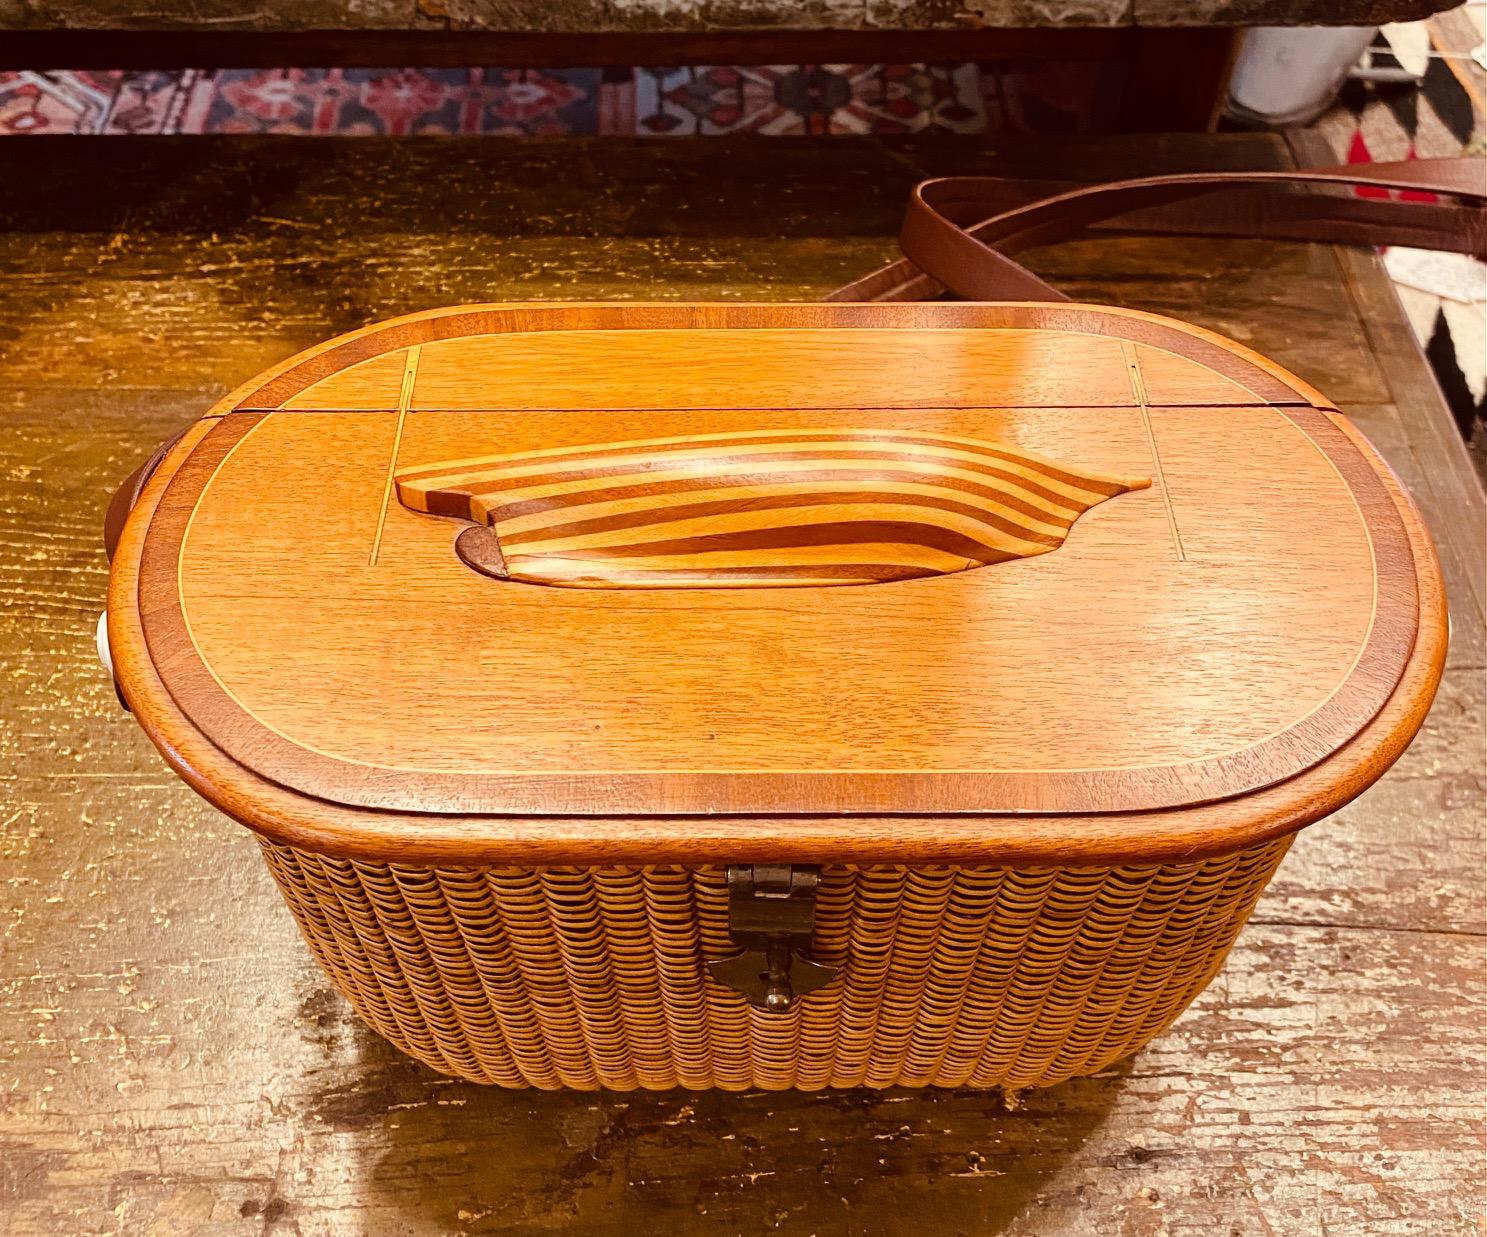 Late 20th Century Nantucket Basket with Half Hull Model of a Sloop on Lid, by Harry Hilbert, 1995